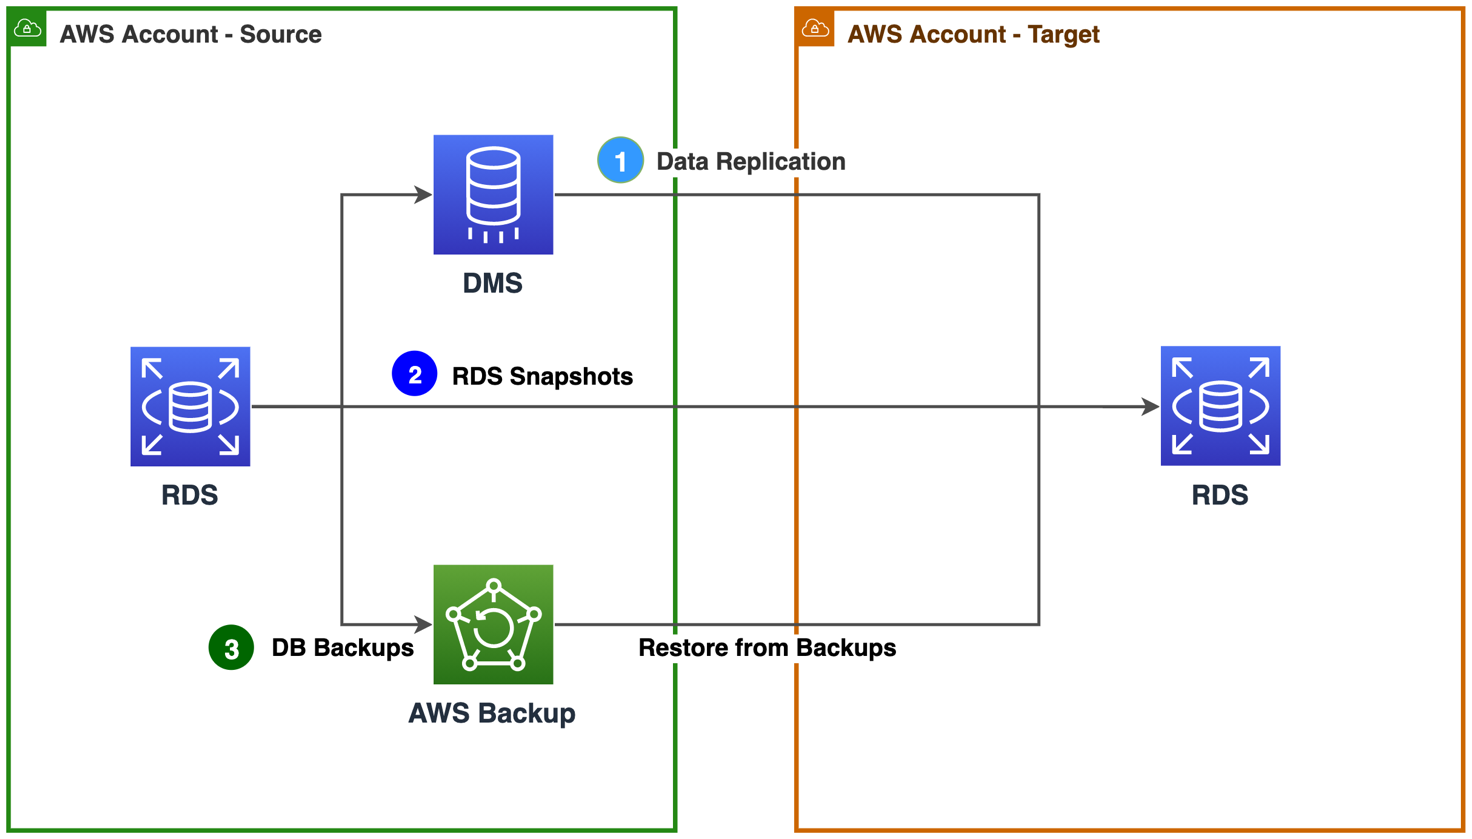 Migration of Cloud Amazon Web Services (AWS) or Any Other Services